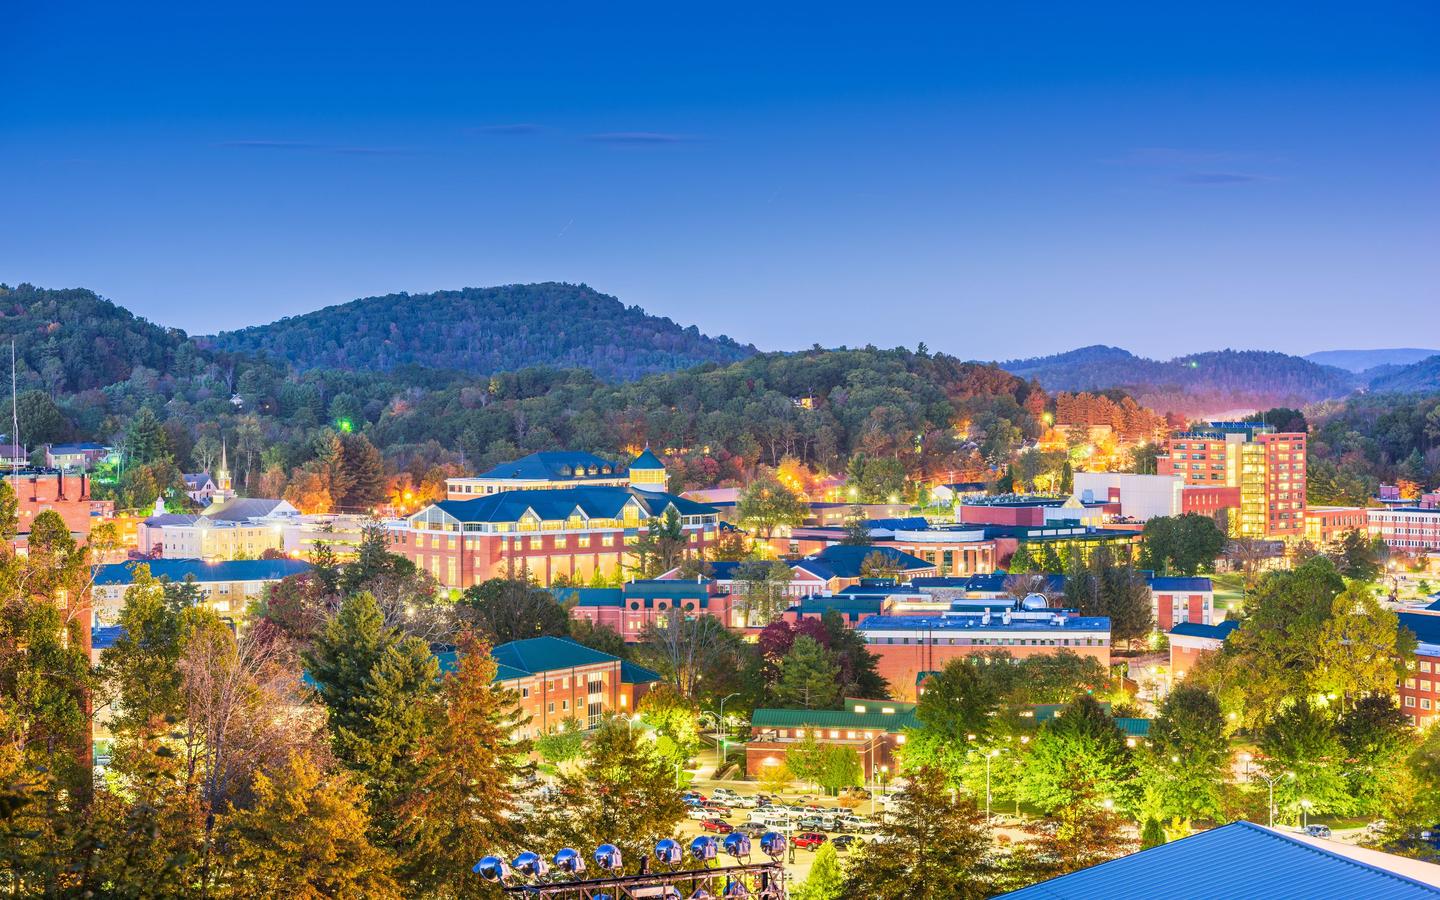 16 Best Hotels in Boone. Hotels from 55/night KAYAK